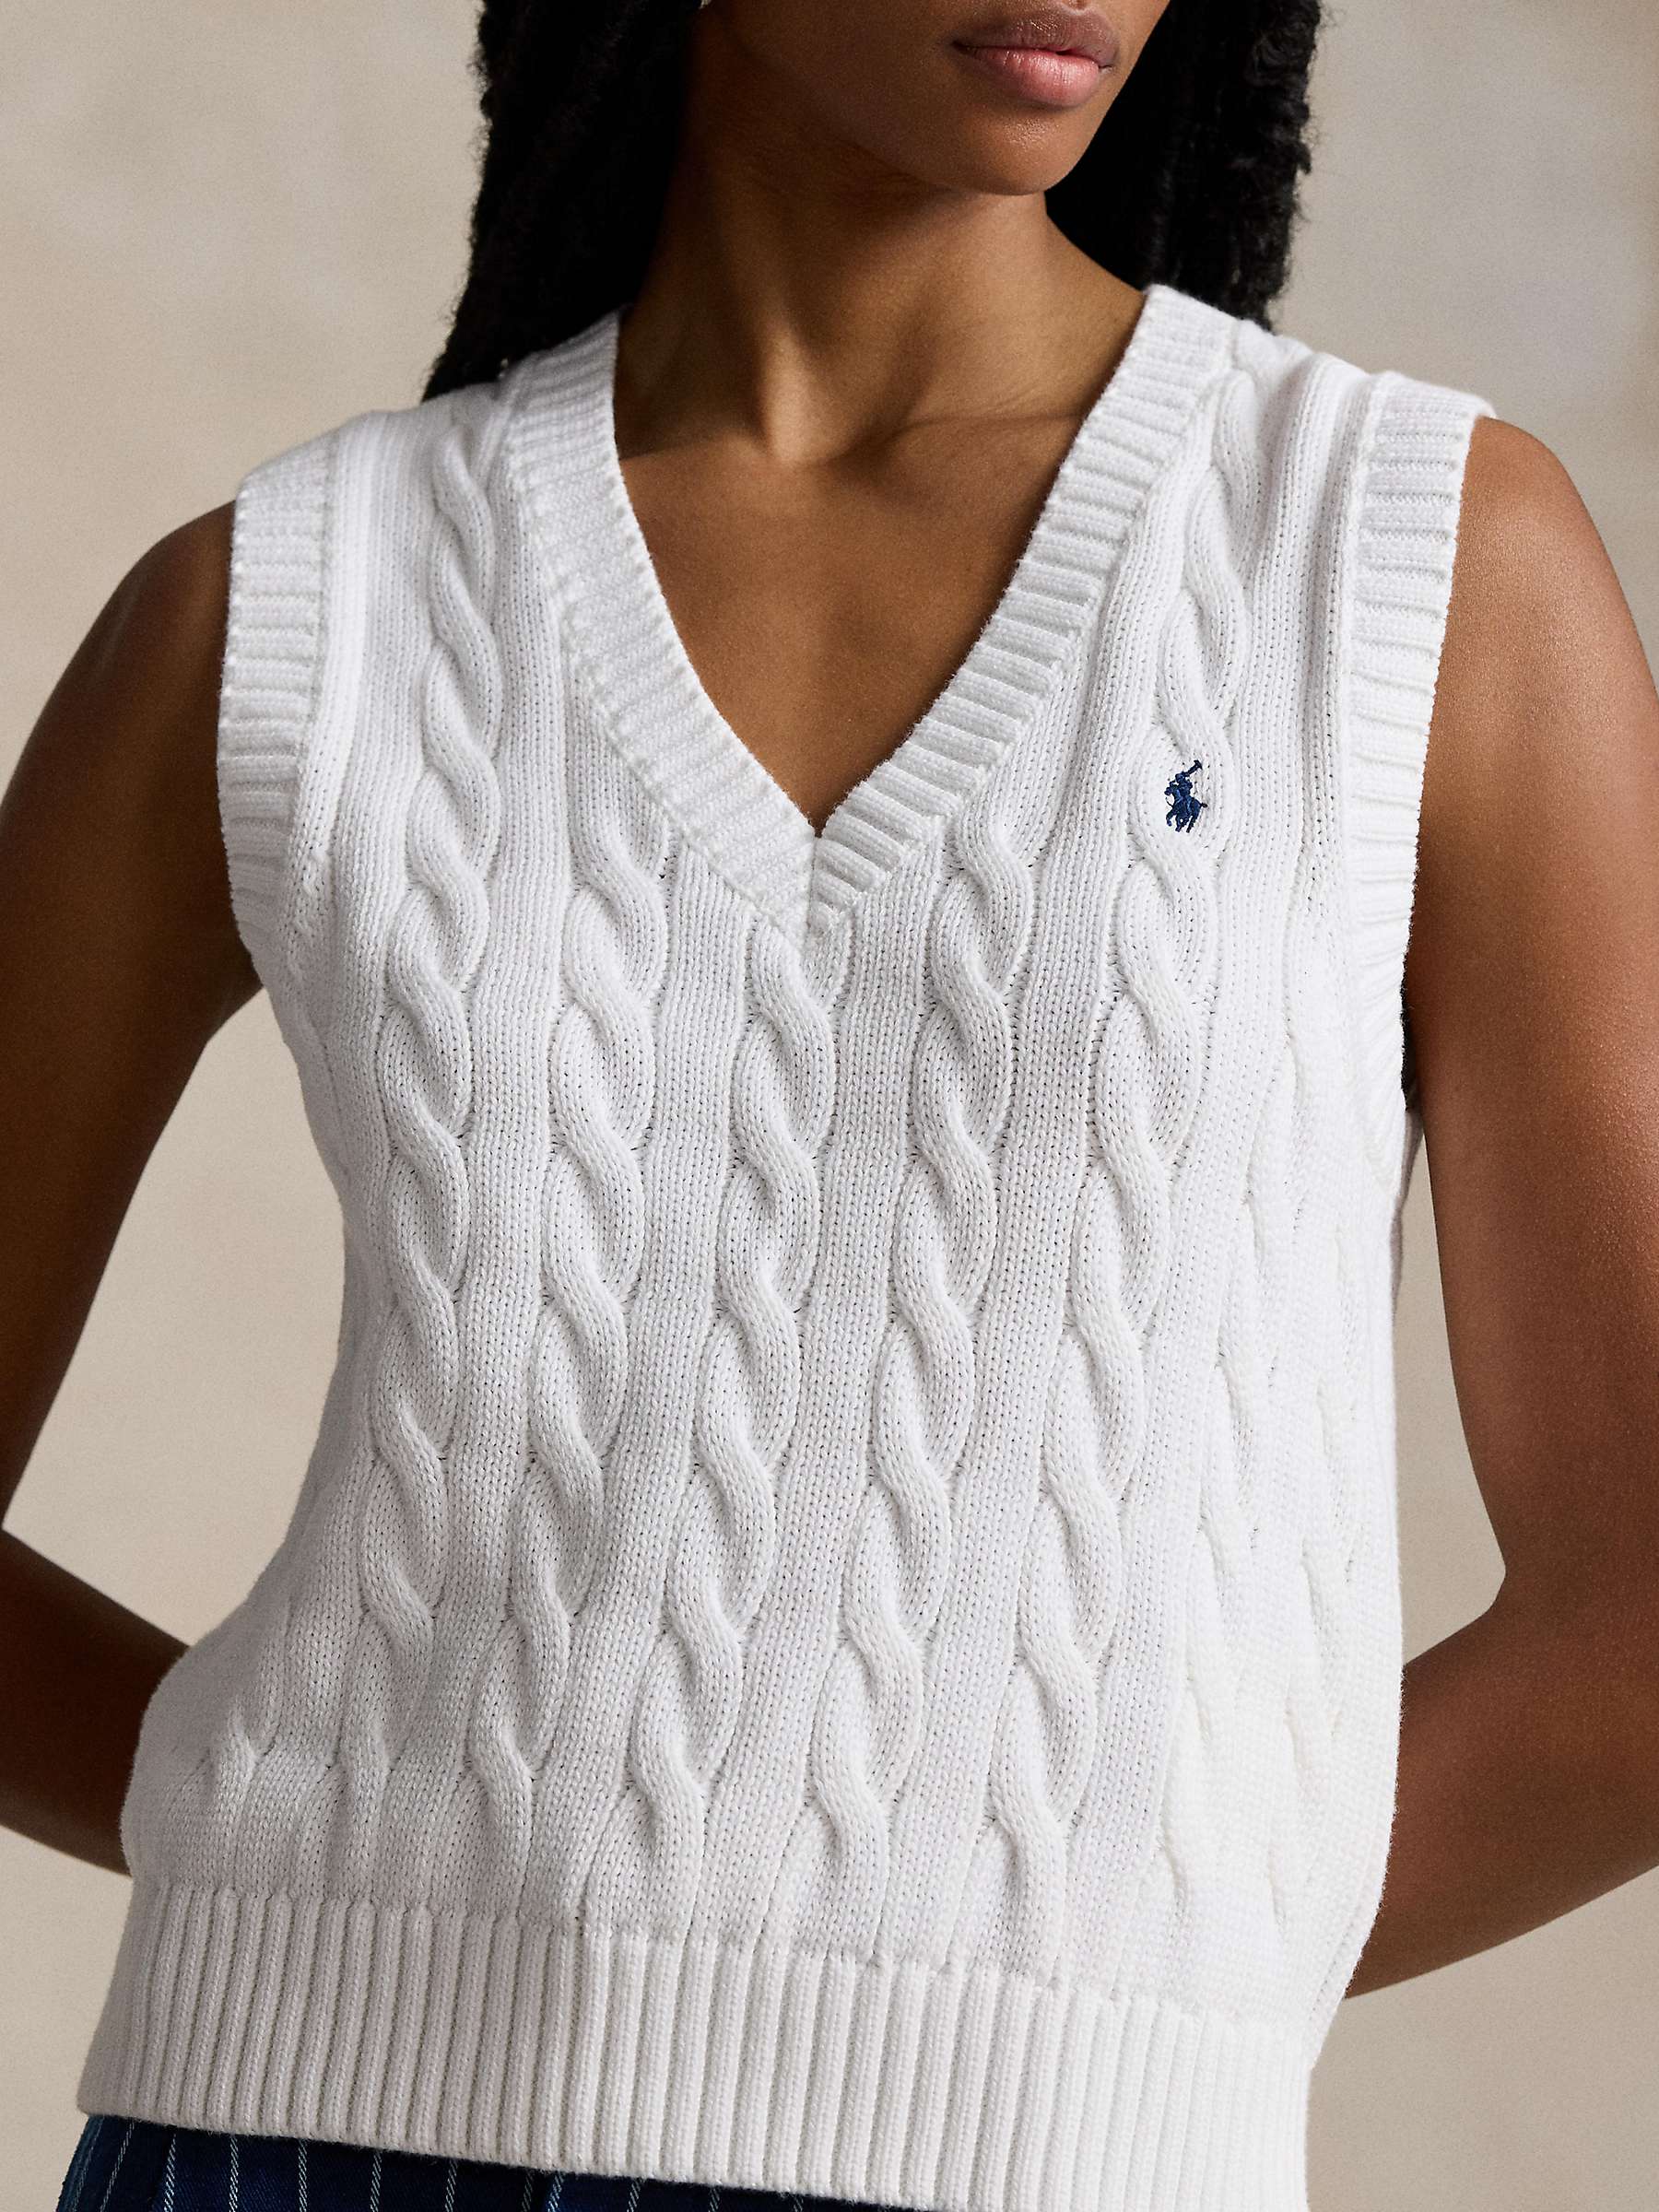 Buy Polo Ralph Lauren Cable Knit Sleeveless Knit Top, White Online at johnlewis.com